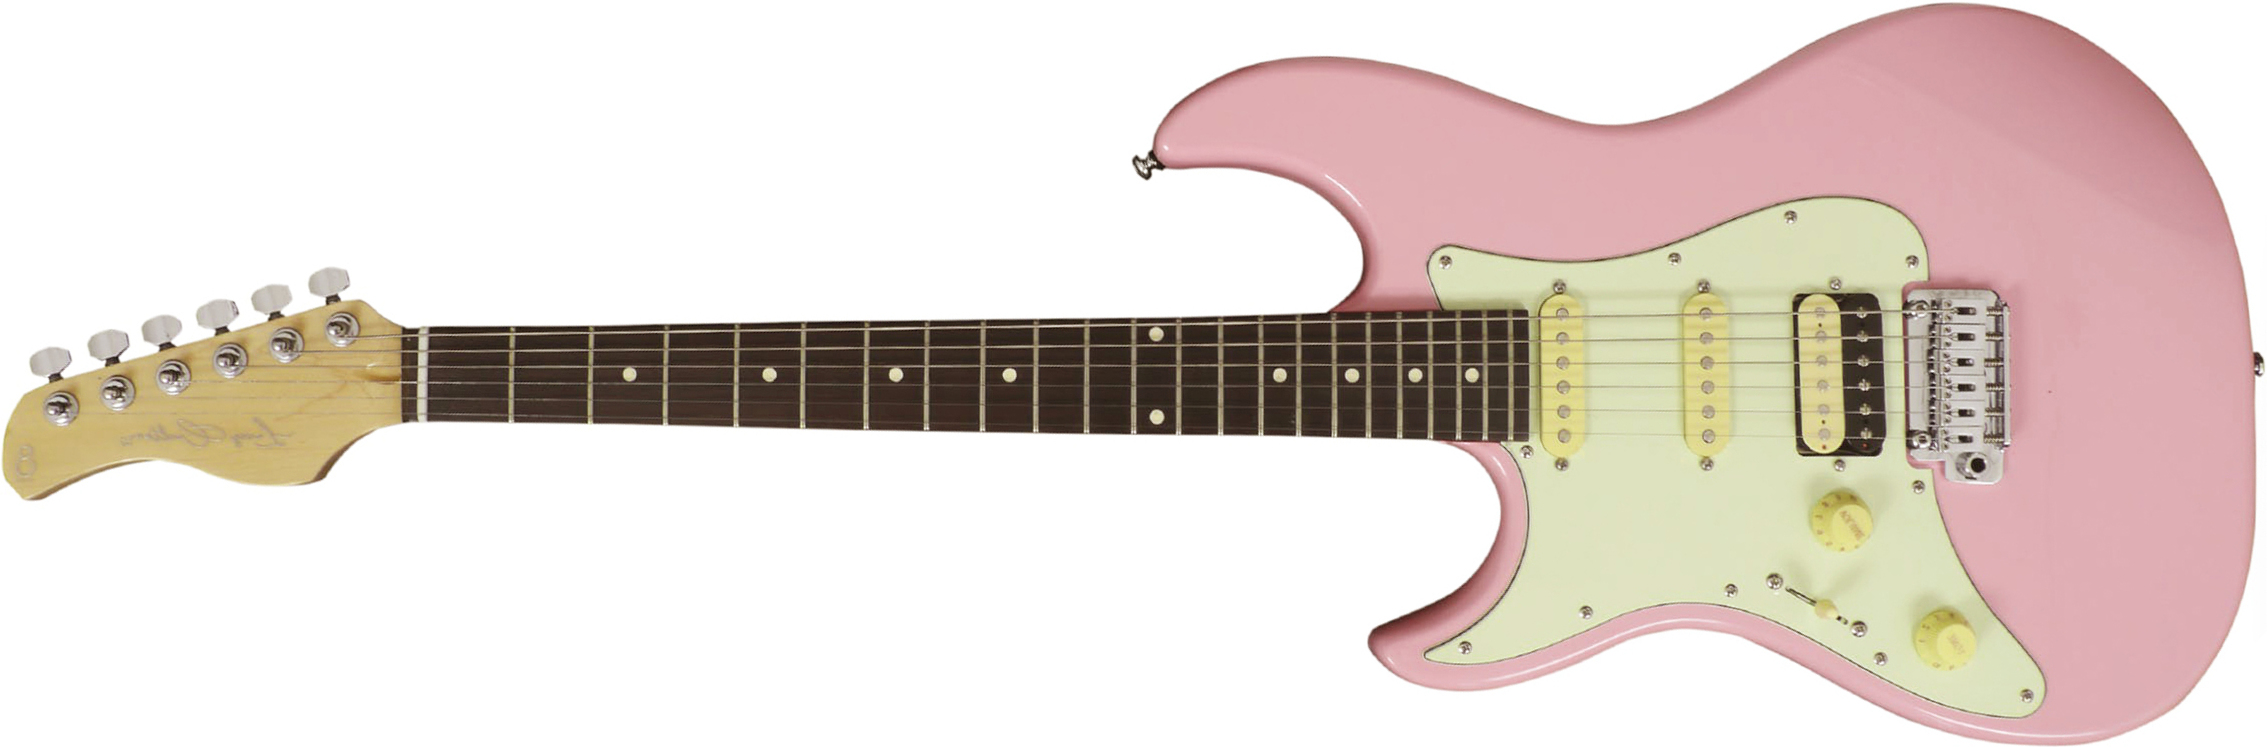 Sire Larry Carlton S3 Lh Signature Gaucher Hss Trem Rw - Pink - Left-handed electric guitar - Main picture